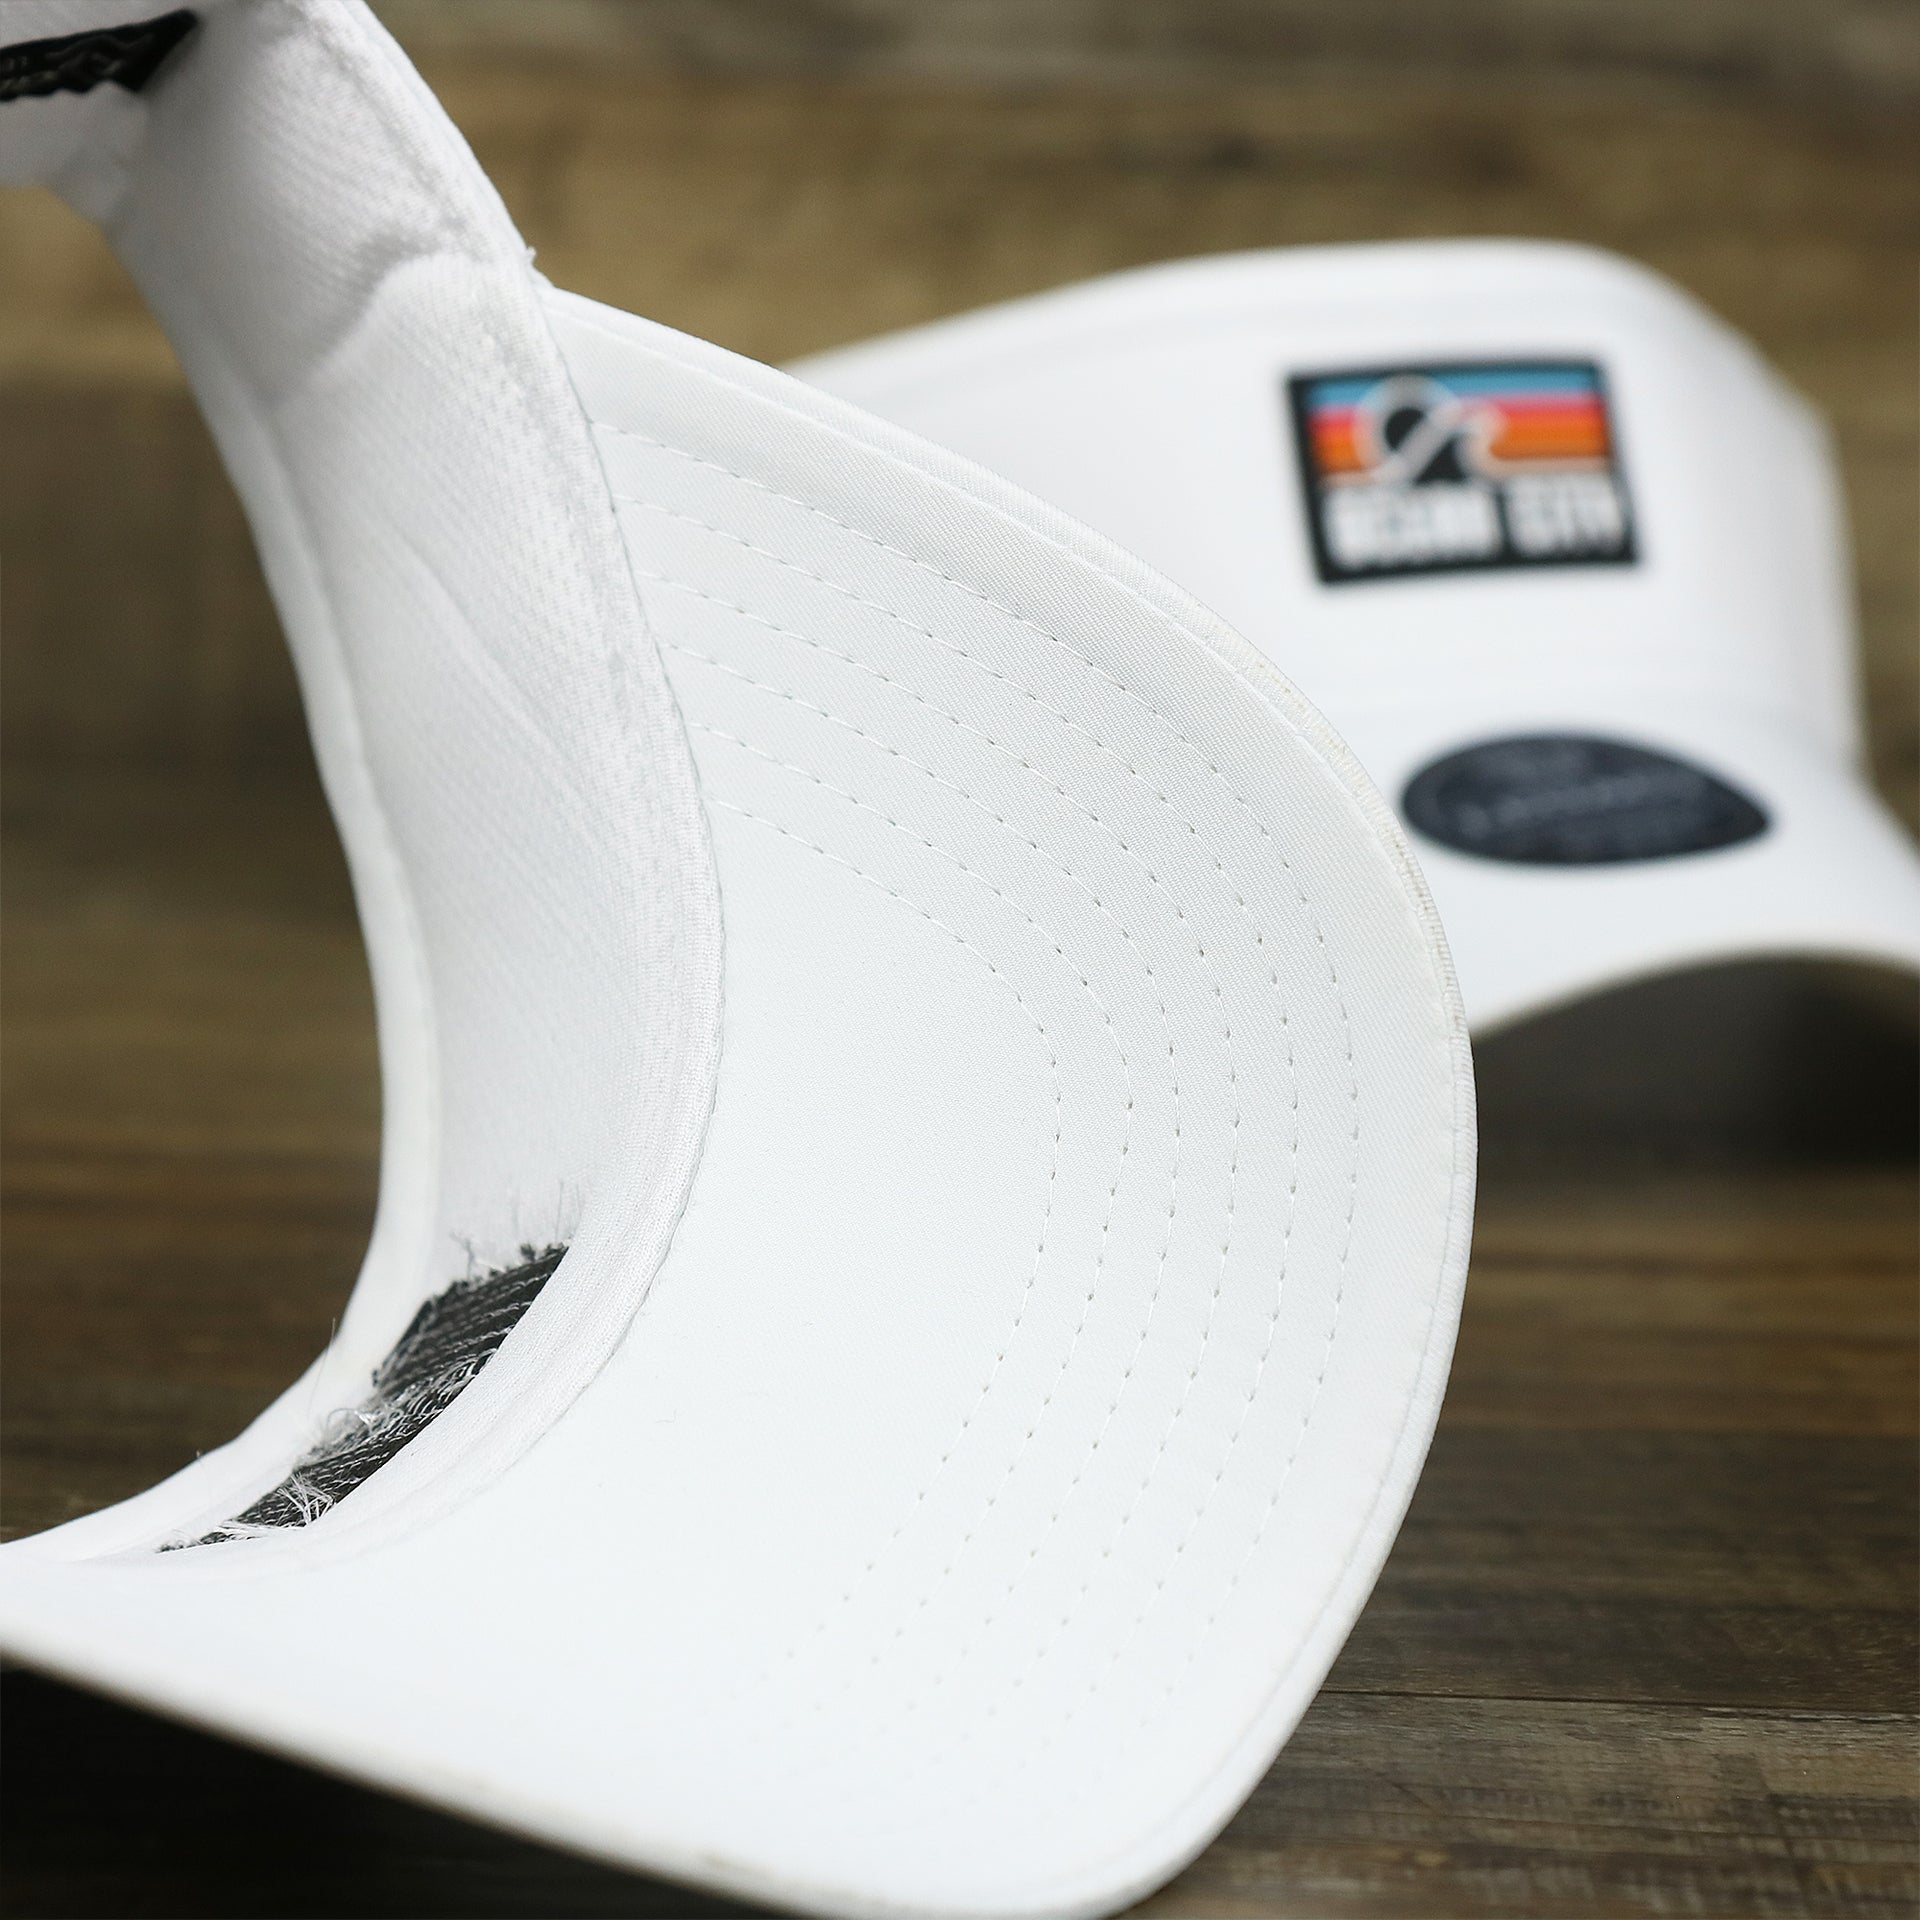 The undervisor on the New Jersey High Point PVC Ocean City Rubber Patch Cool Fit Adjustable Visor | White Visor